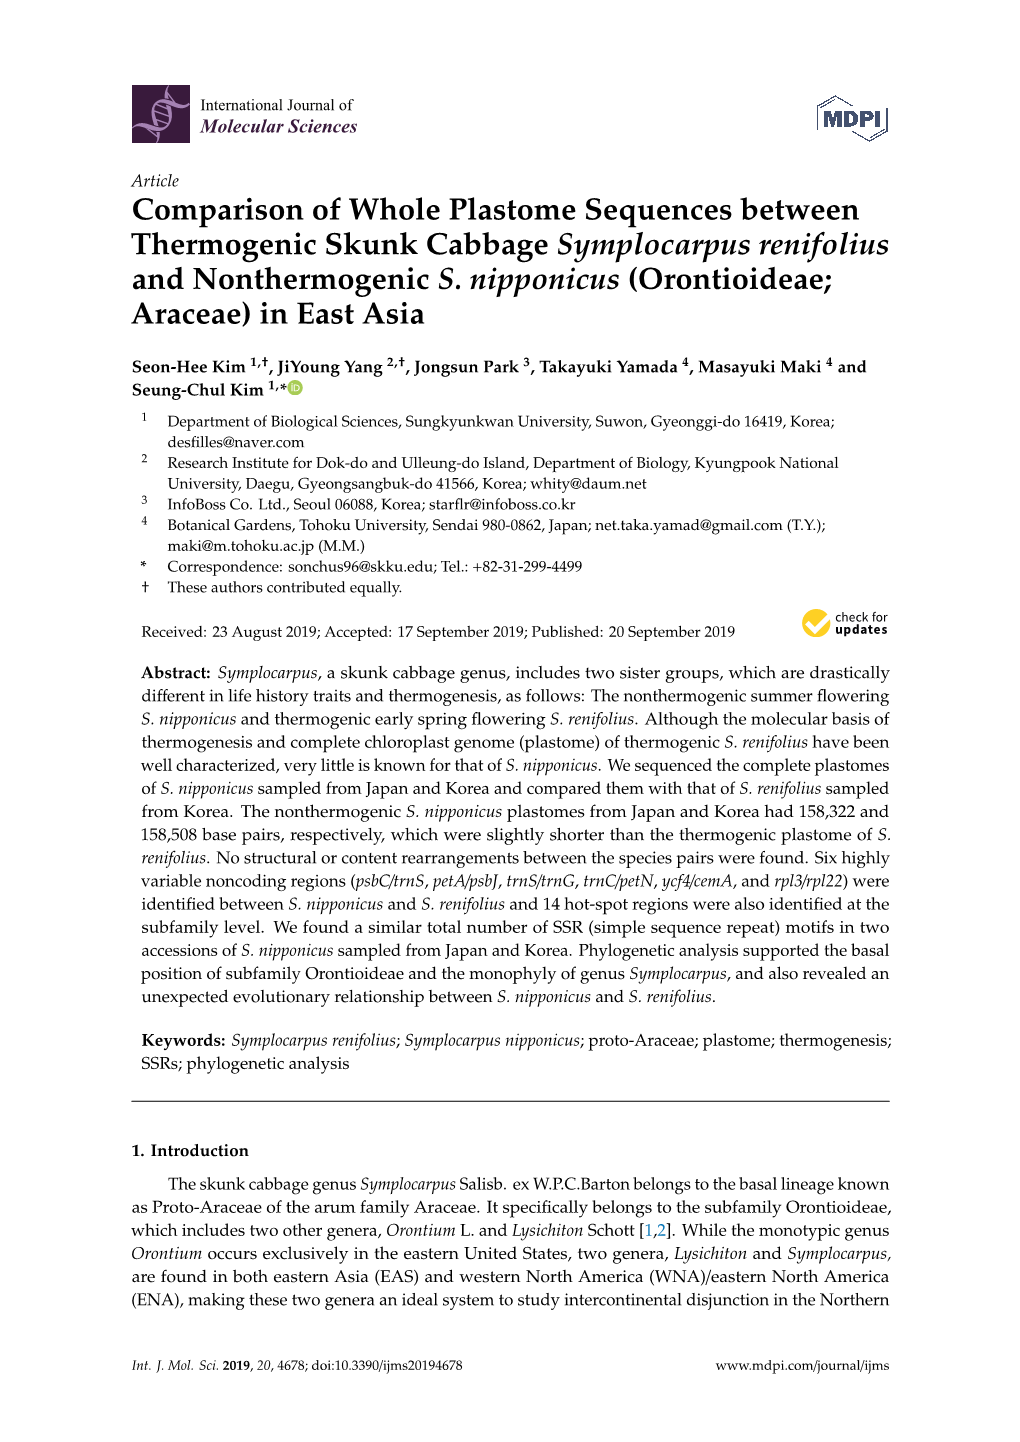 Comparison of Whole Plastome Sequences Between Thermogenic Skunk Cabbage Symplocarpus Renifolius and Nonthermogenic S. Nipponicus (Orontioideae; Araceae) in East Asia